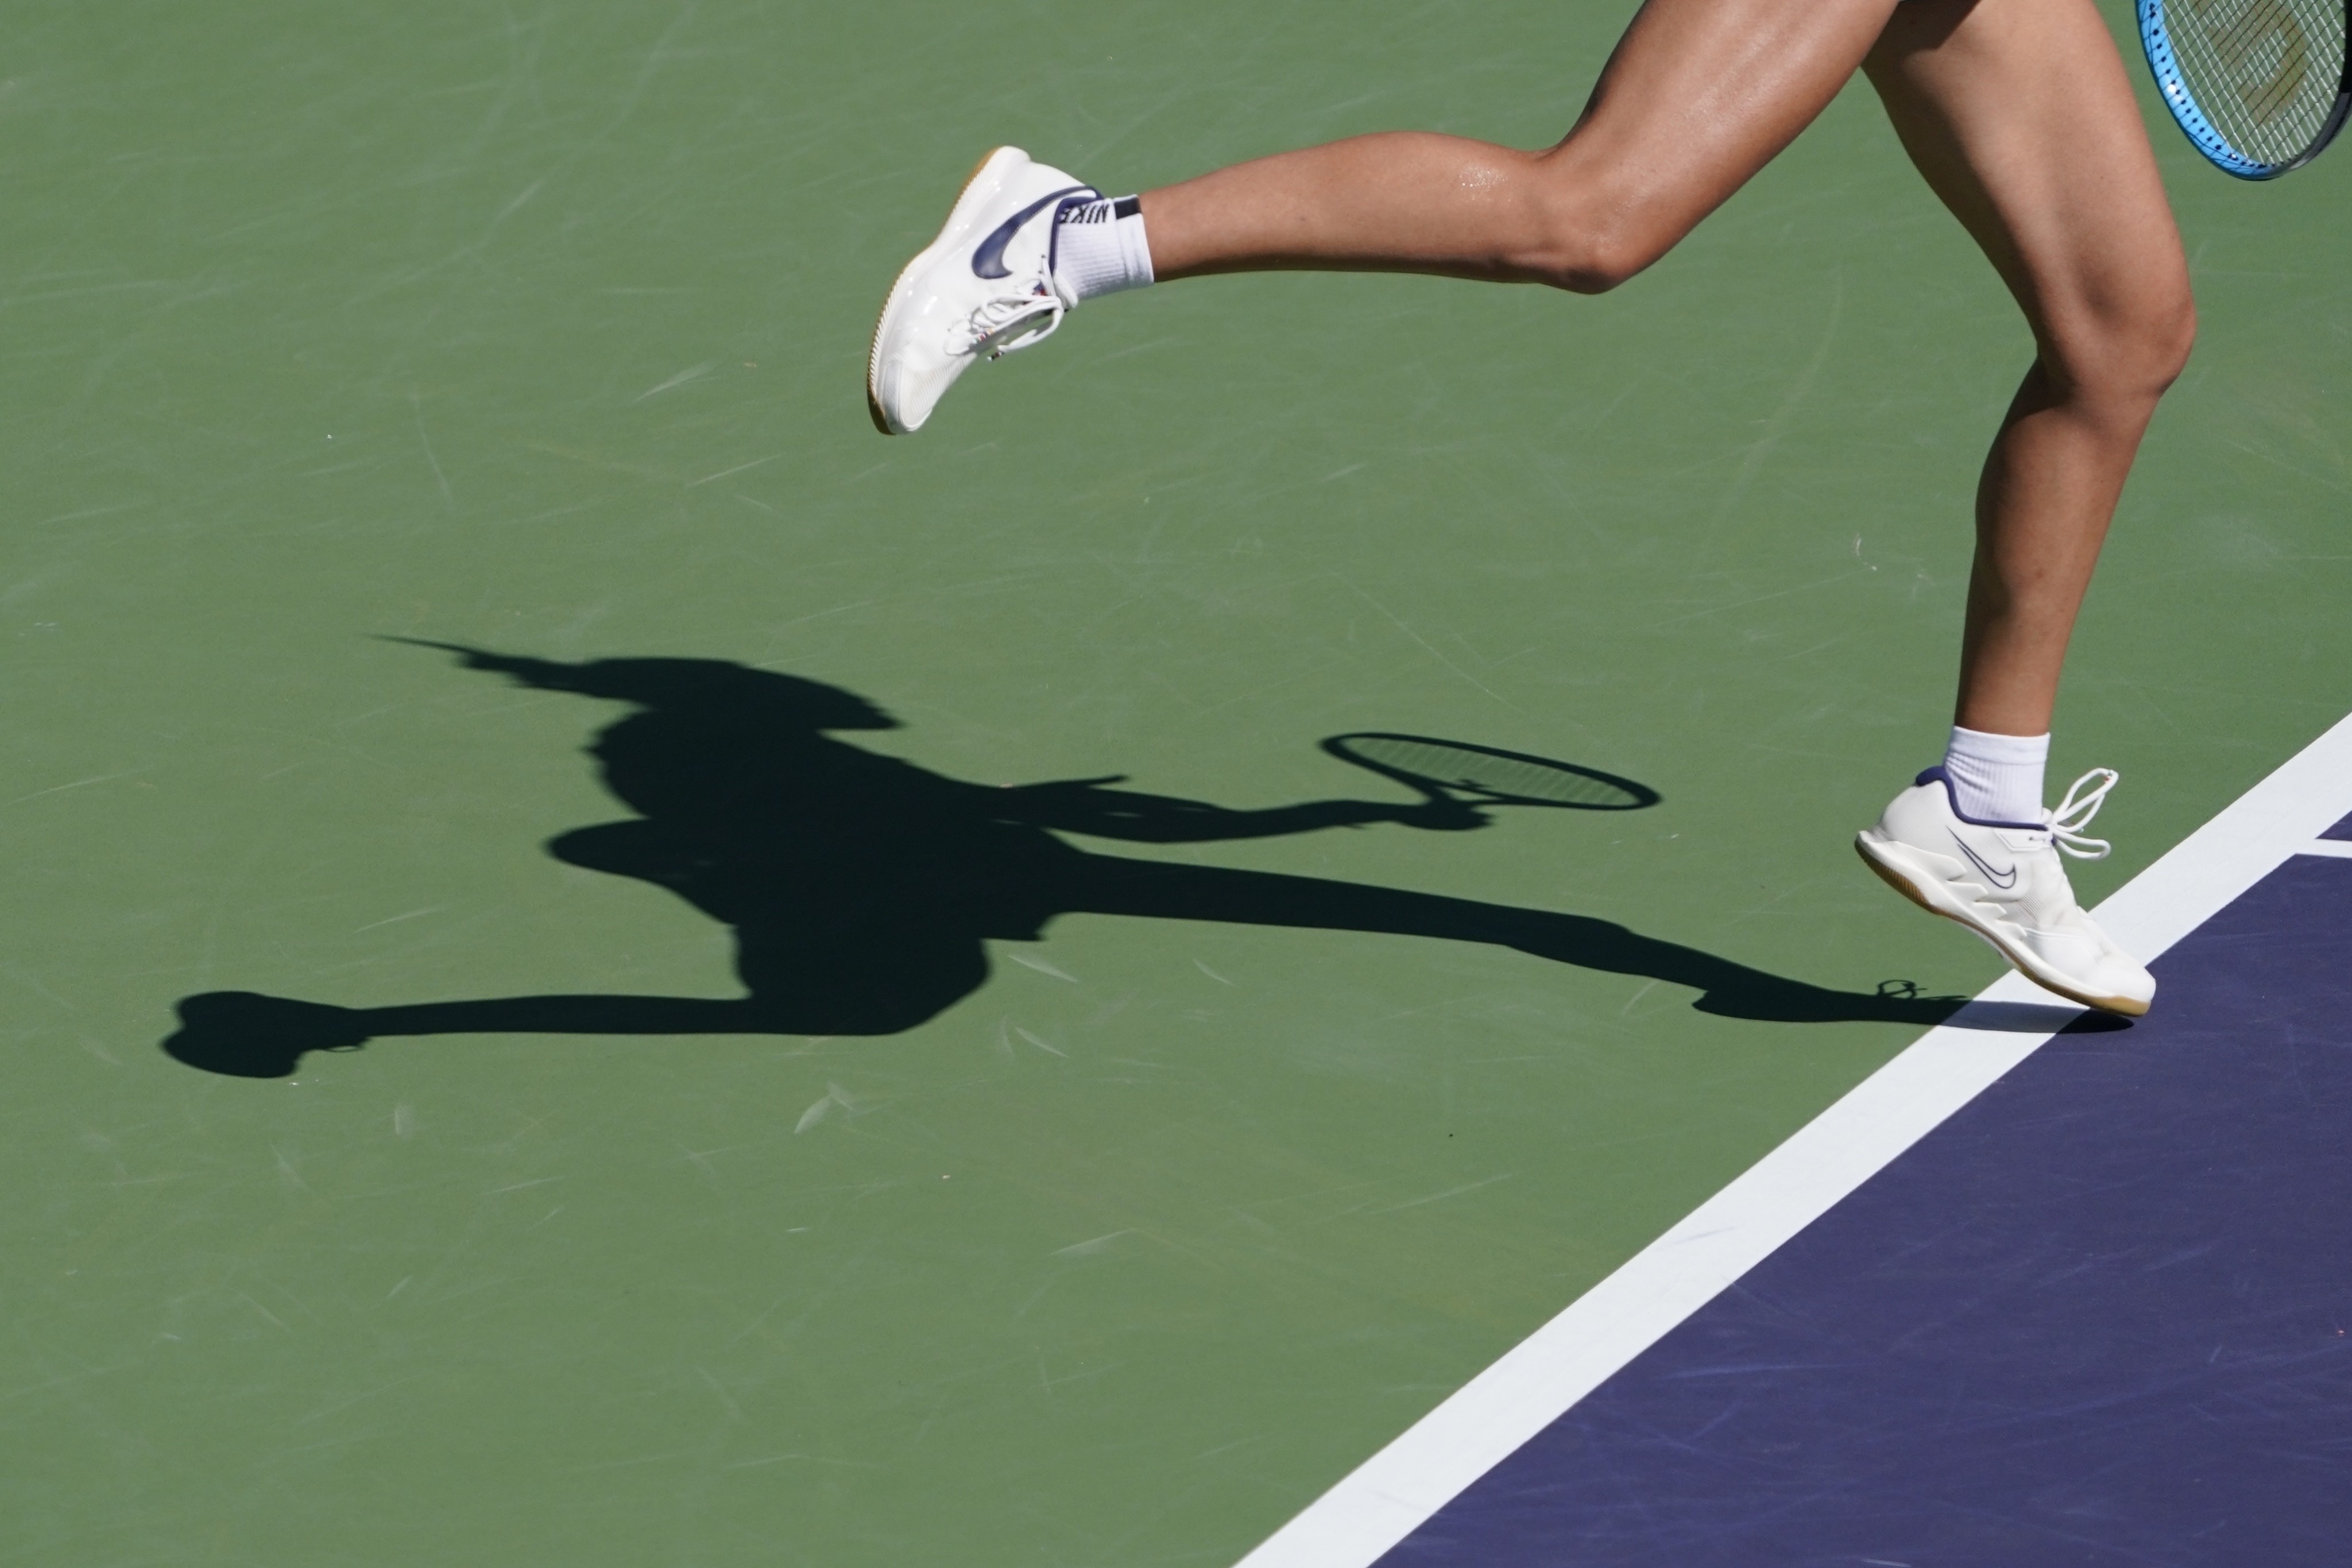 The WTA Finals will be held in Fort Worth, Texas, next month, moving the event out of China for the second year in a row. Photo: AP